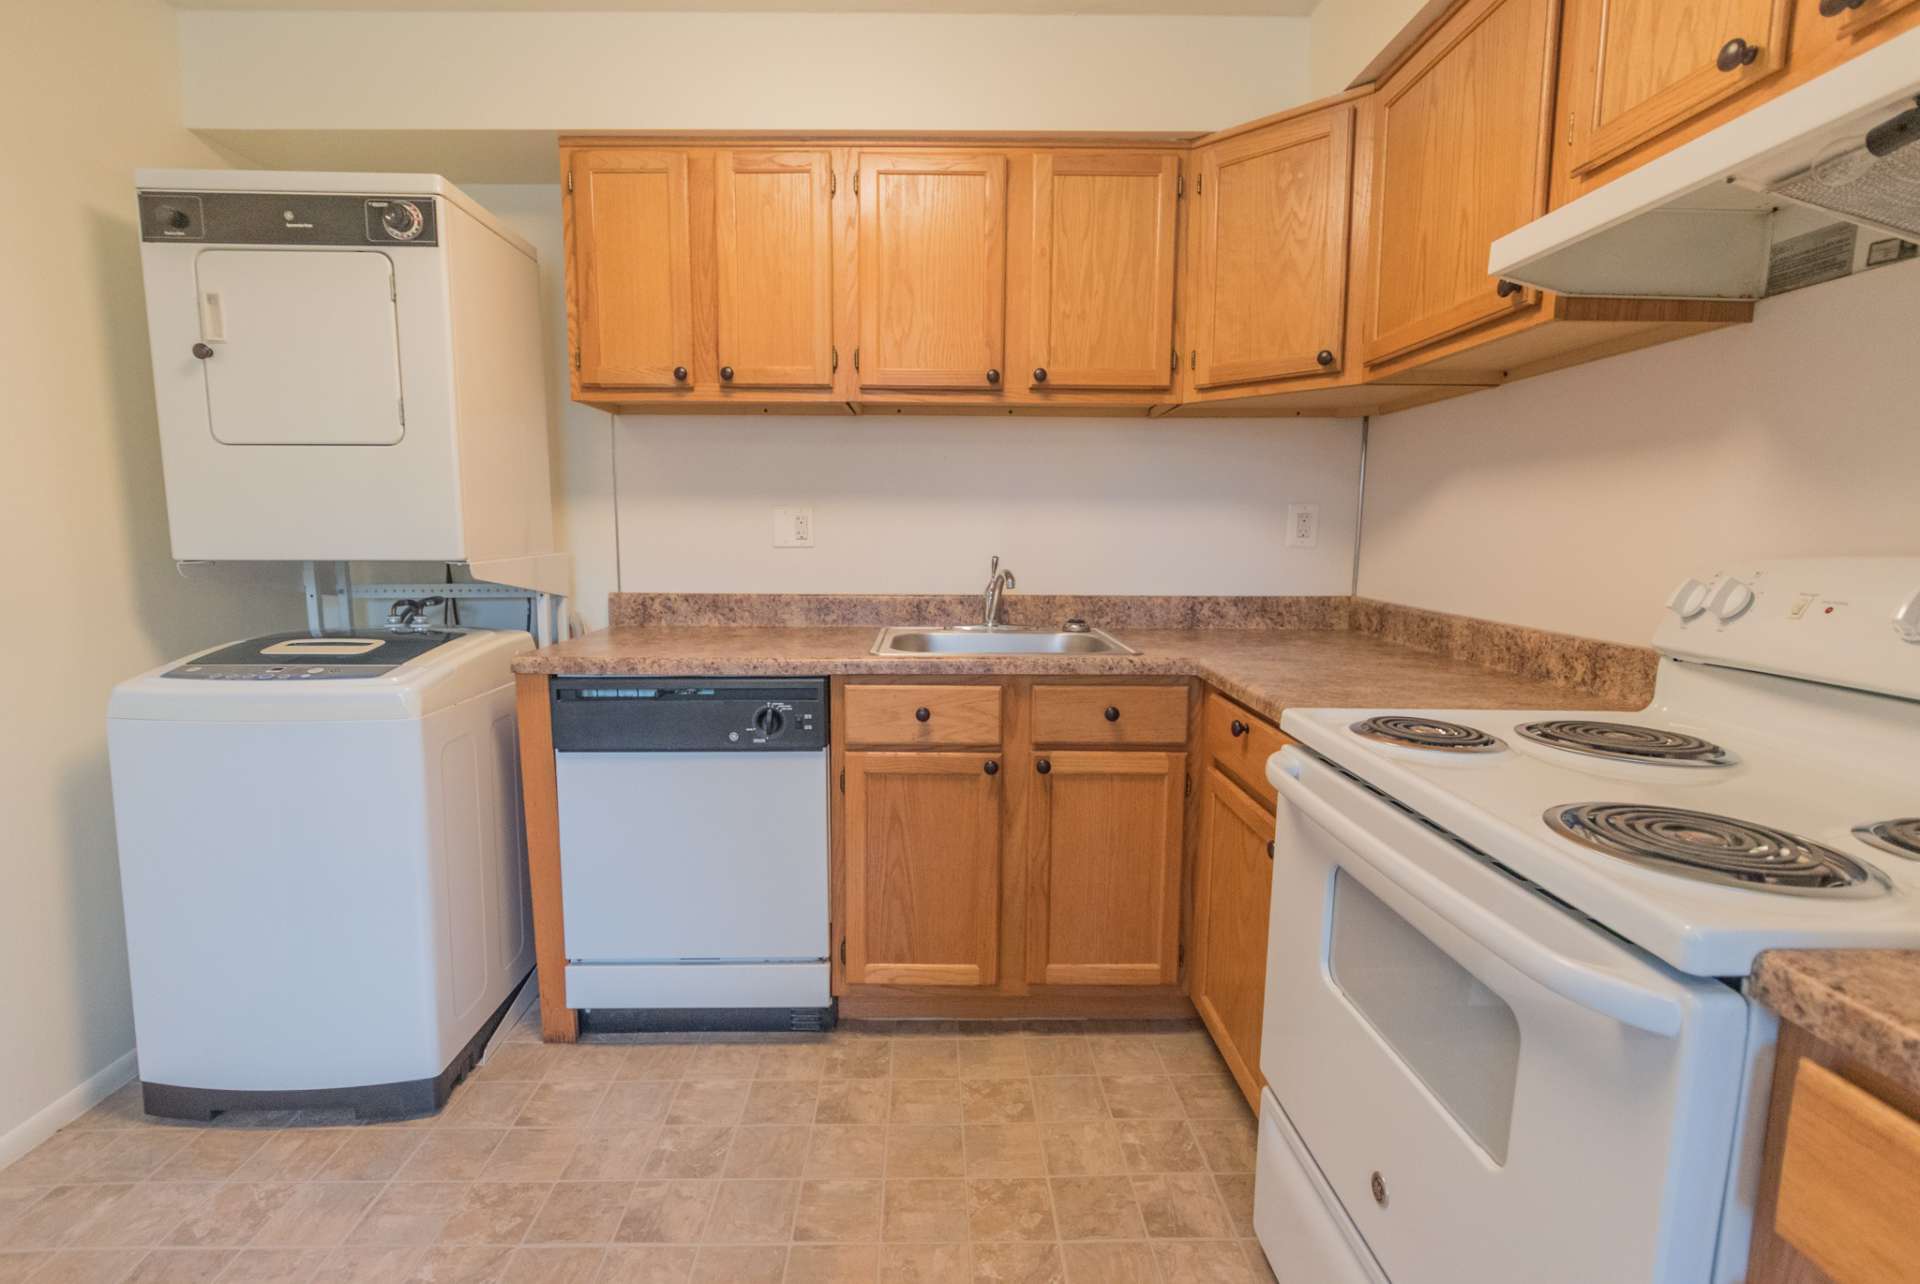 Willow Run apartments kitchen with white appliances and wood cabinets